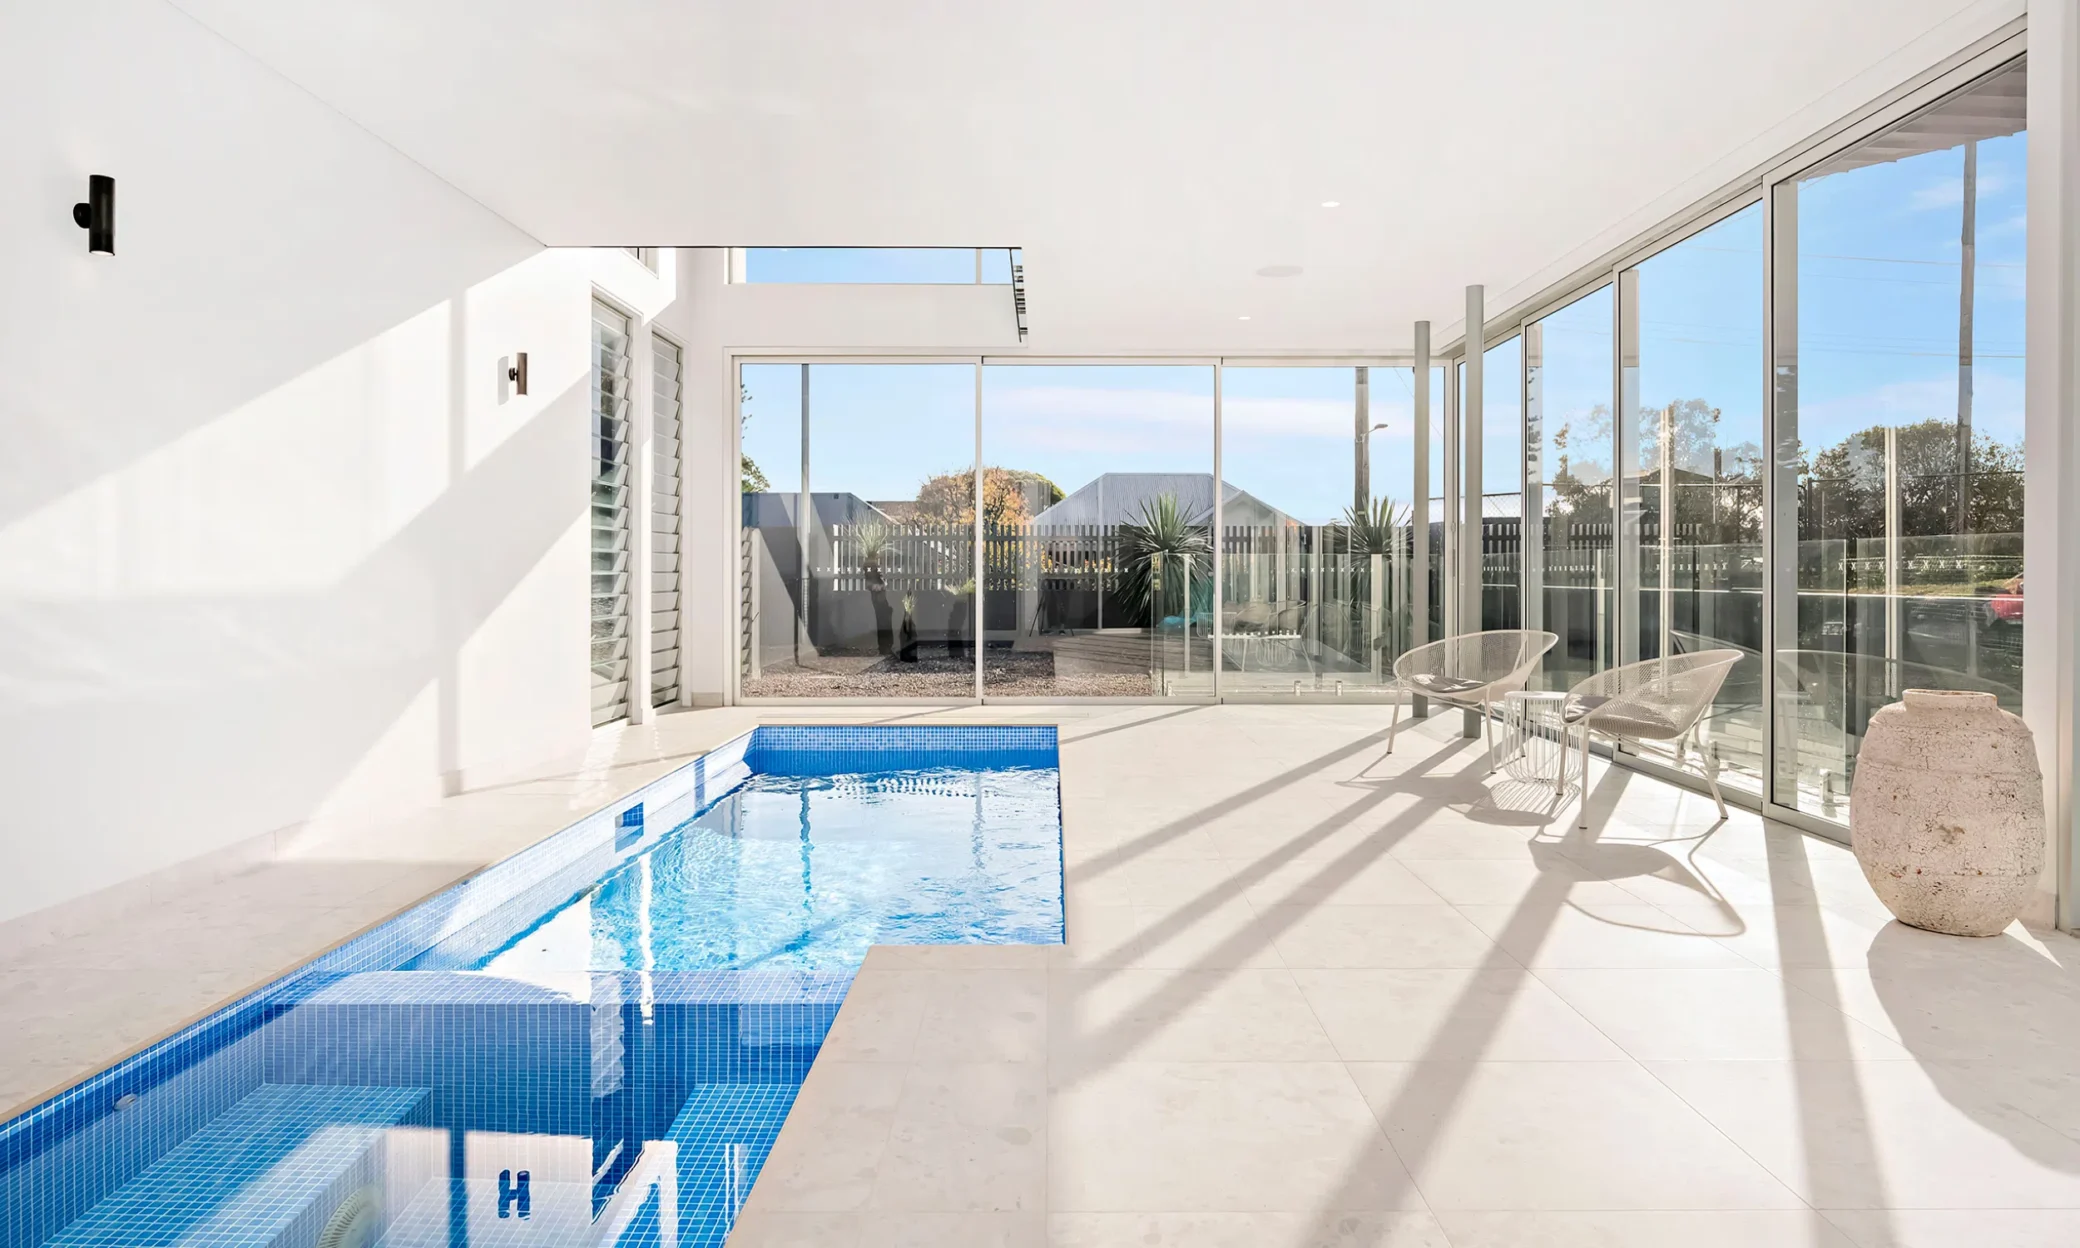 Modern indoor pool room in Newcastle with large glass sliding doors opening to an outdoor area. The room features a blue tiled pool, glossy white floor, two white chairs near a window, and bright natural light